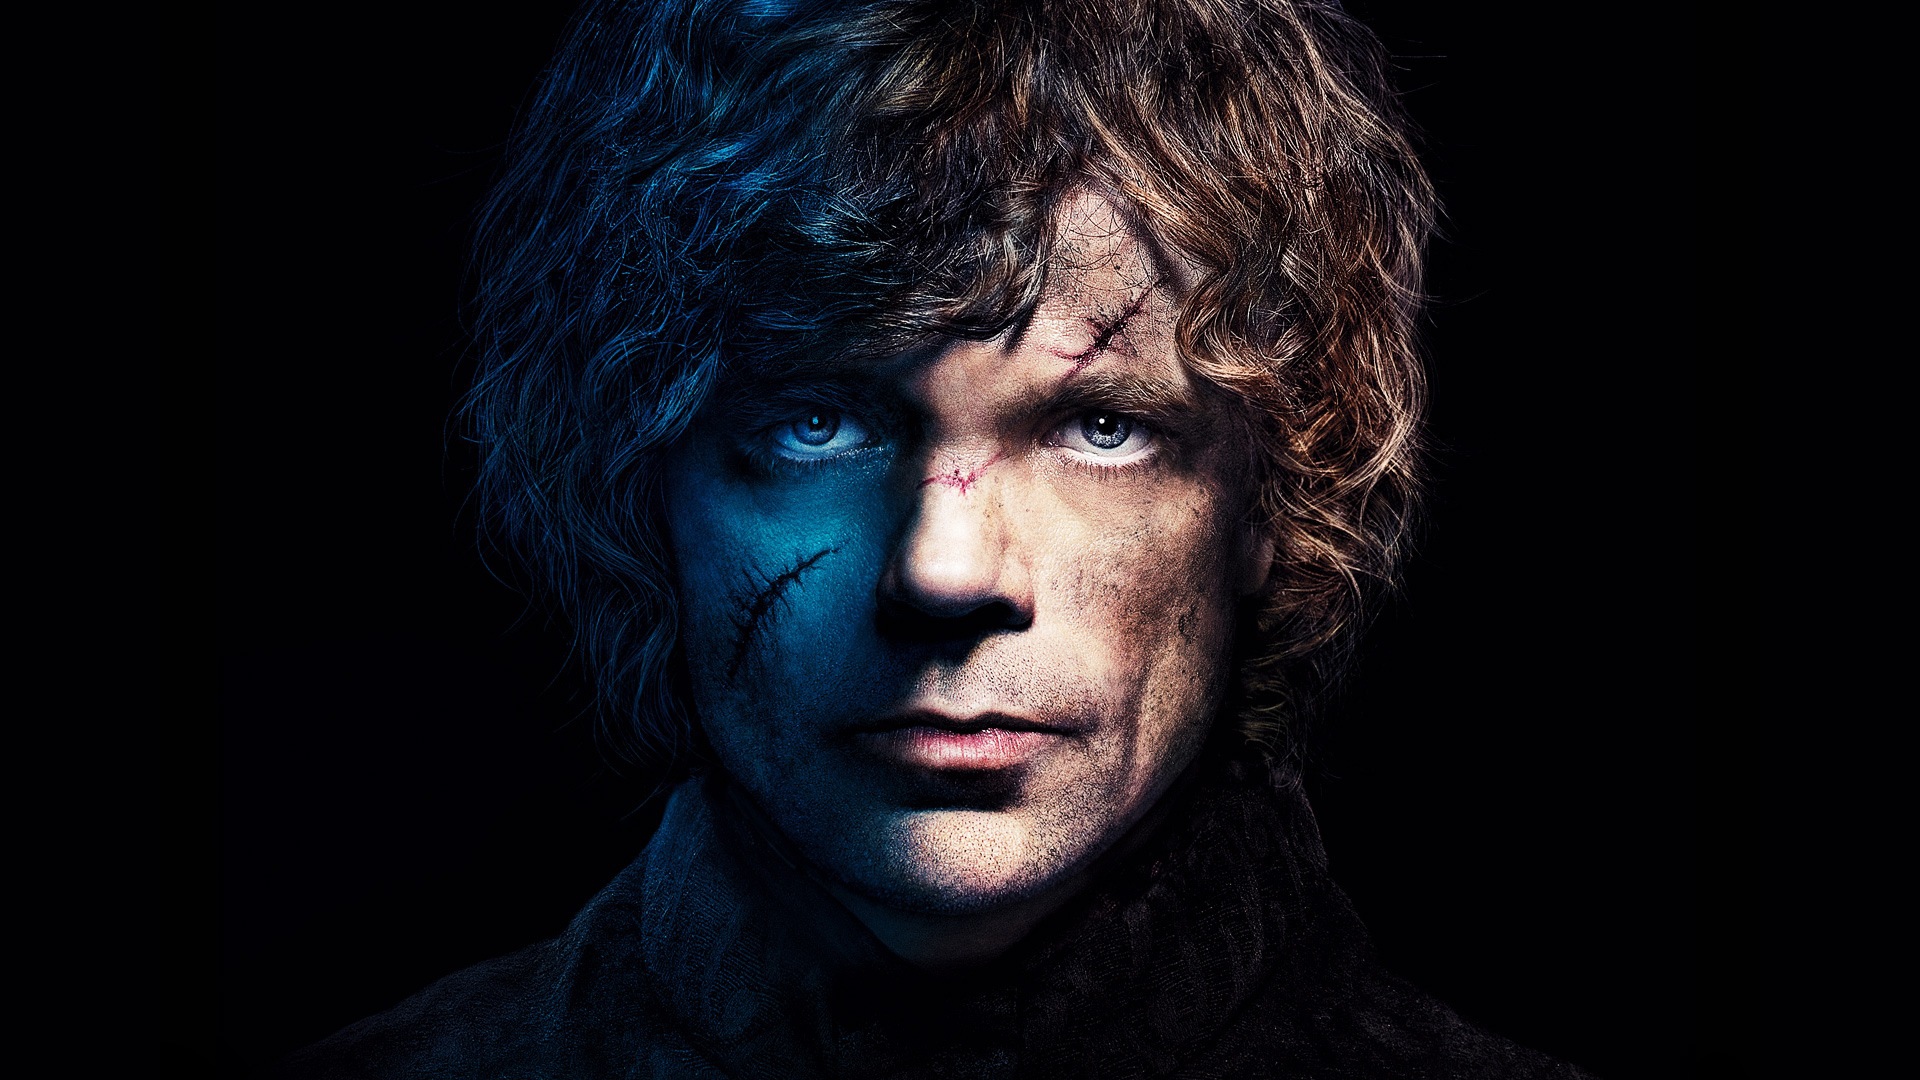 Wallpaper Game Of Thrones Portrait Tyrion Lannister - Tyrion Game Of Thrones Hd - HD Wallpaper 